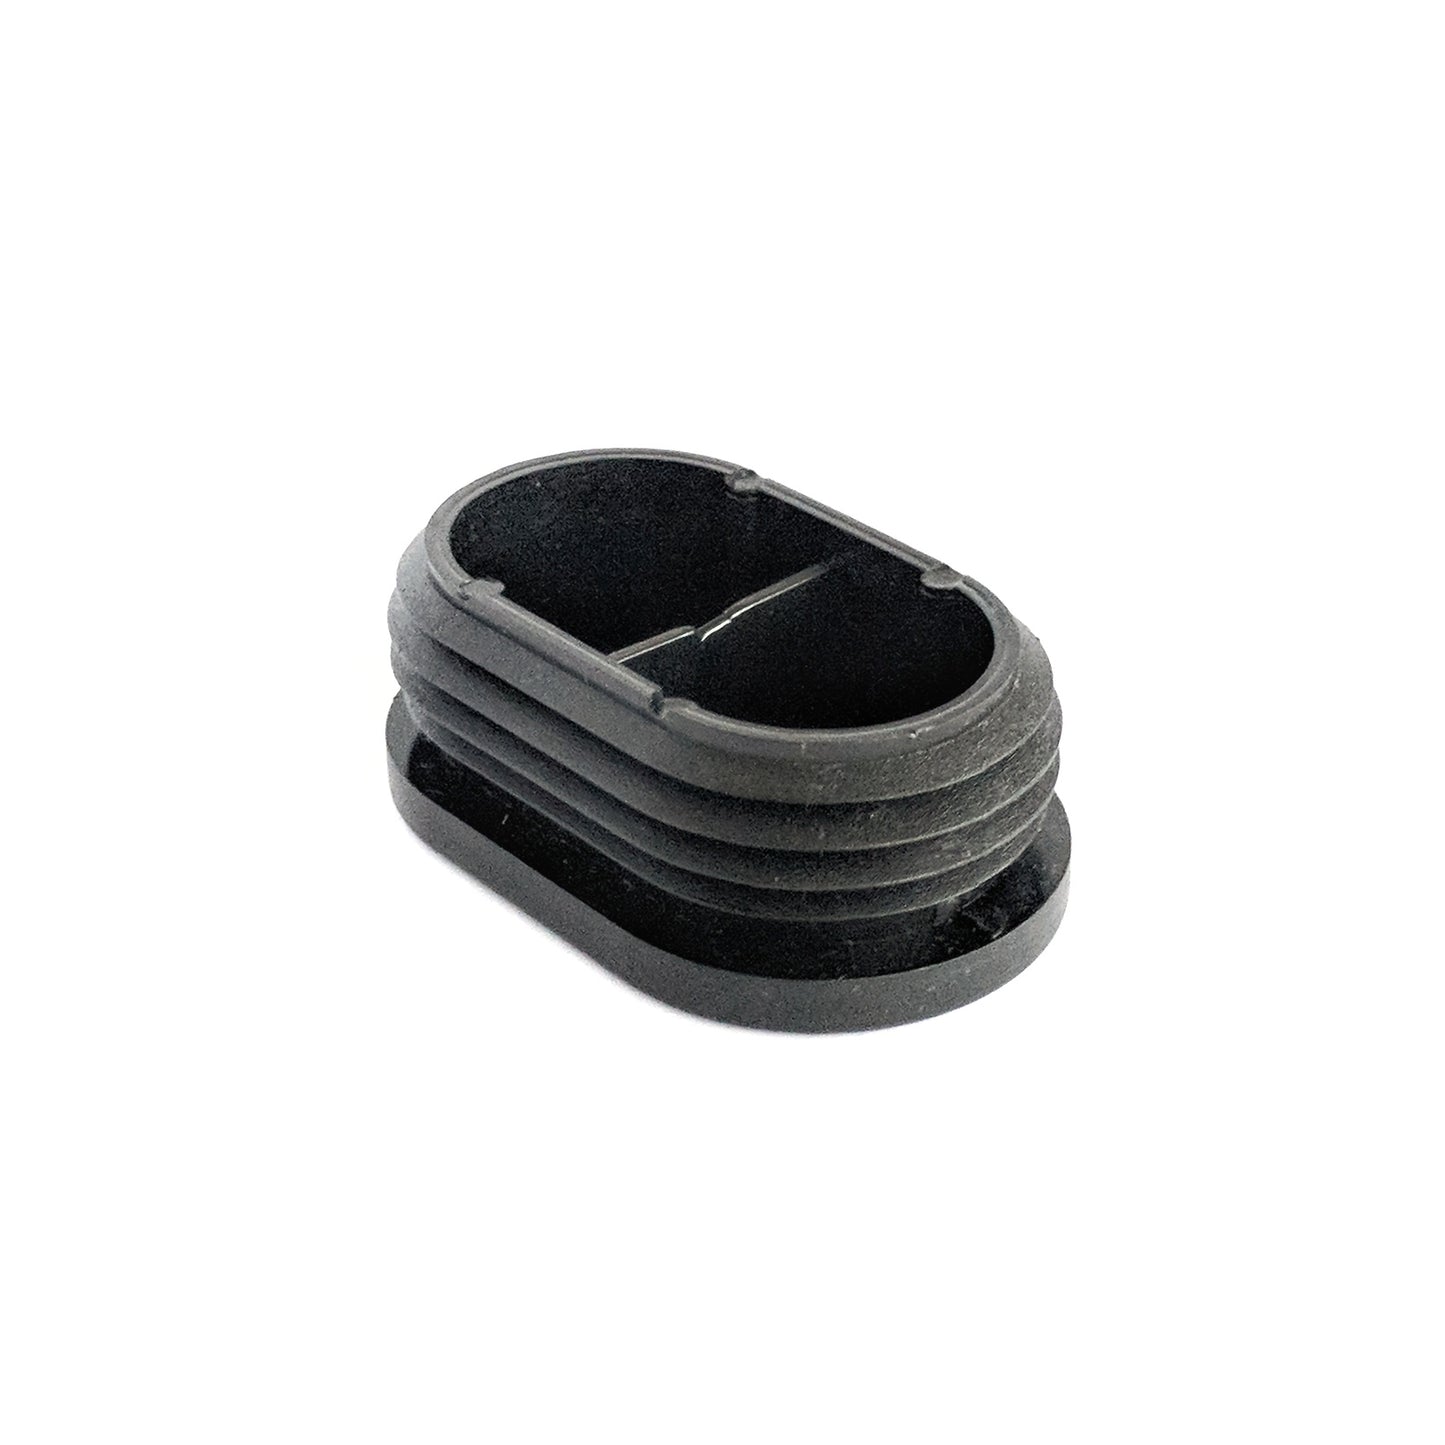 Oval Tube Inserts 55mm x 35mm | Made in Germany | Keay Vital Parts - Keay Vital Parts